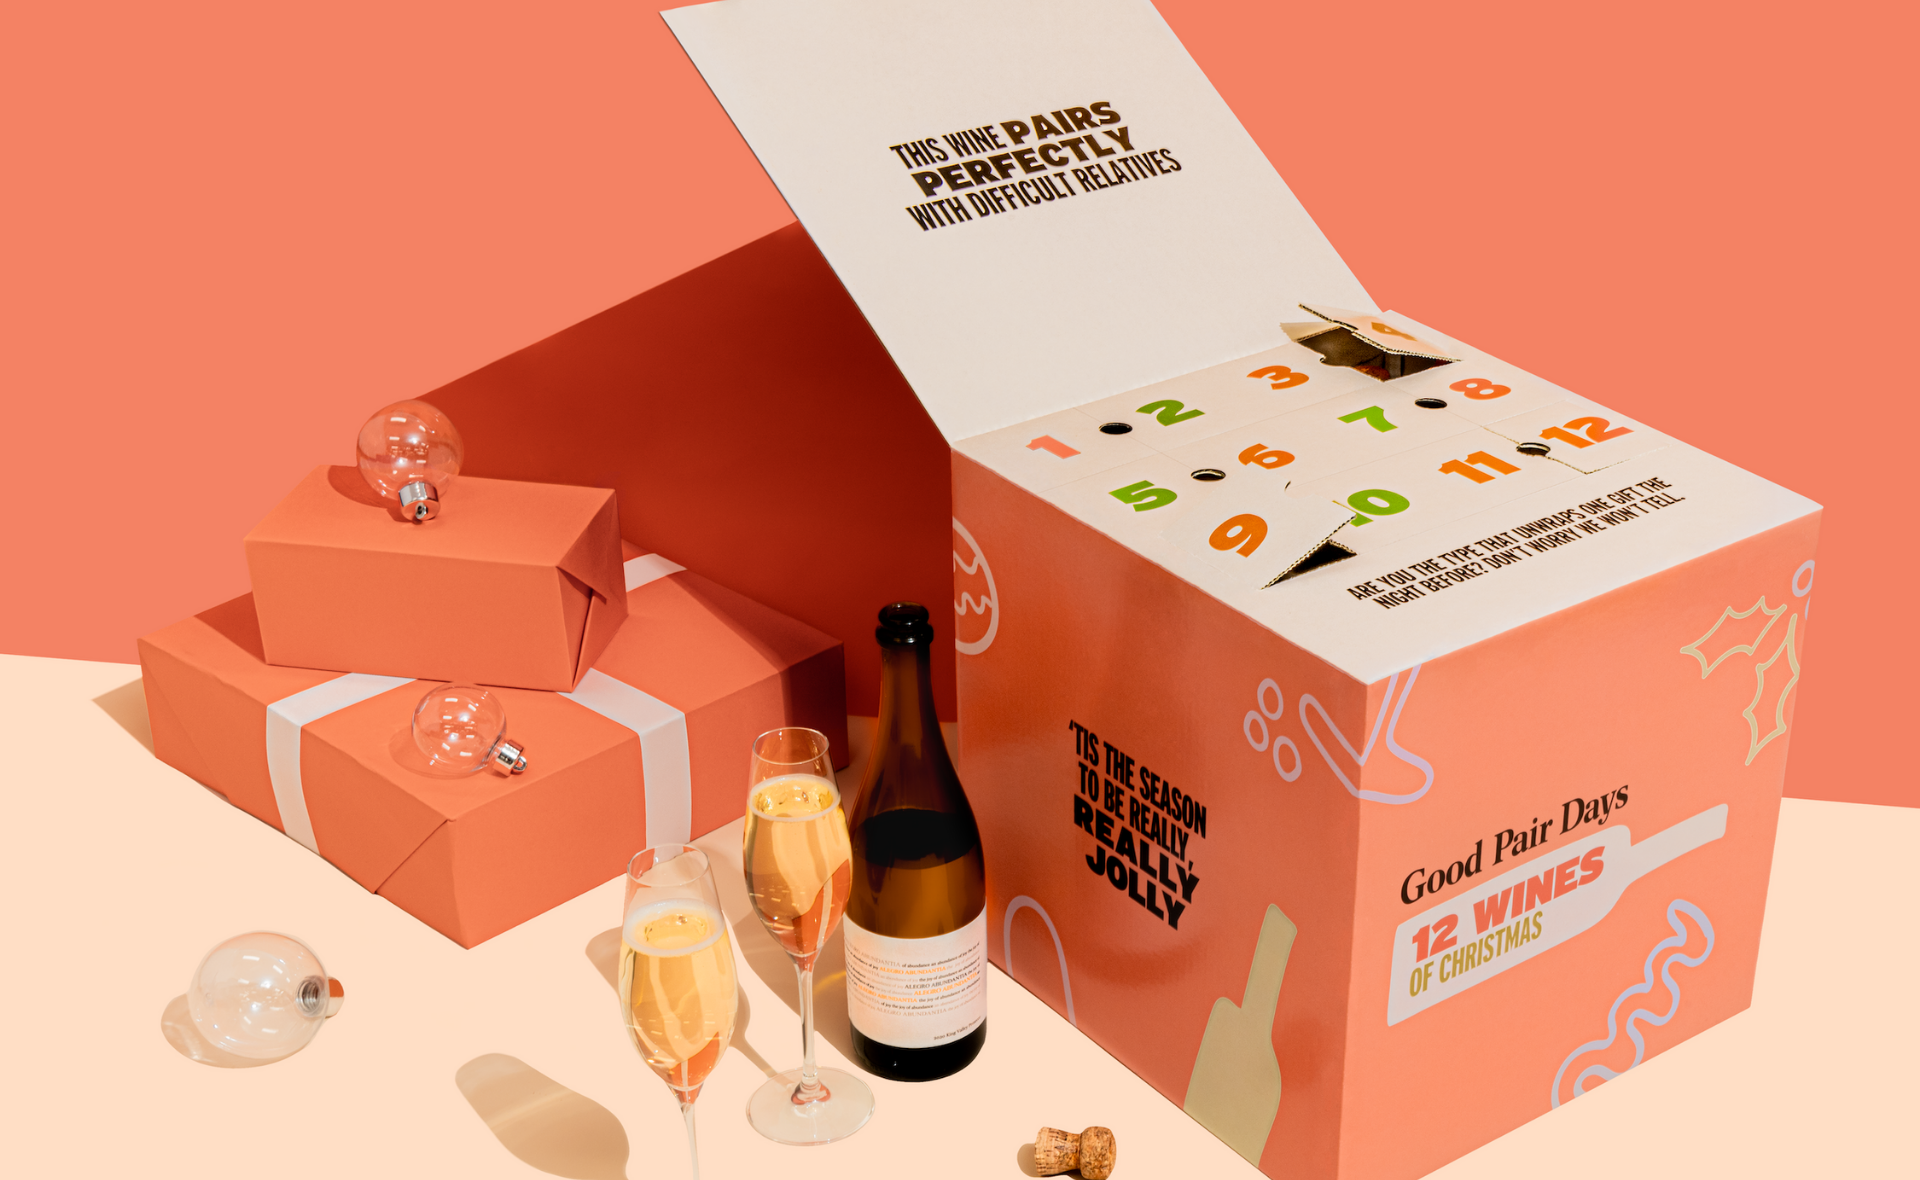 Christmas cheers! Boozy advents calendars are getting us into the festive spirits this season